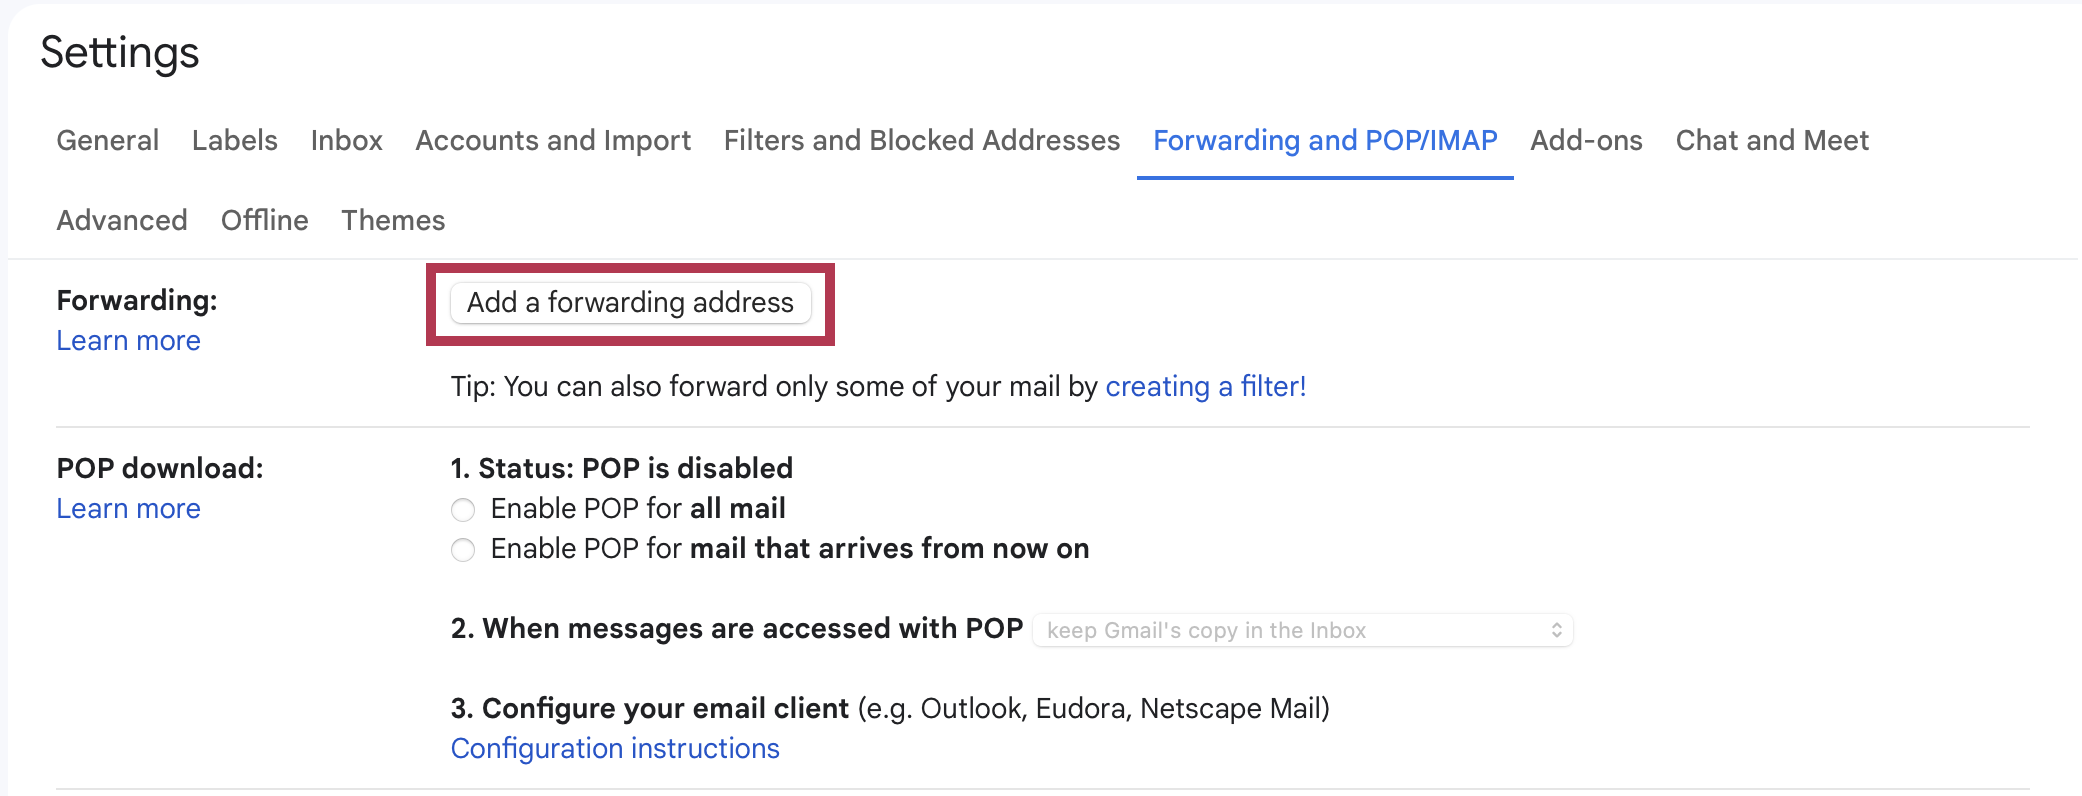 Once you’re in your Gmail account settings, click on the Forwarding and POP/IMAP tab, then click “Forwarding.” From the Forwarding section, click “Add a Forwarding Address.”